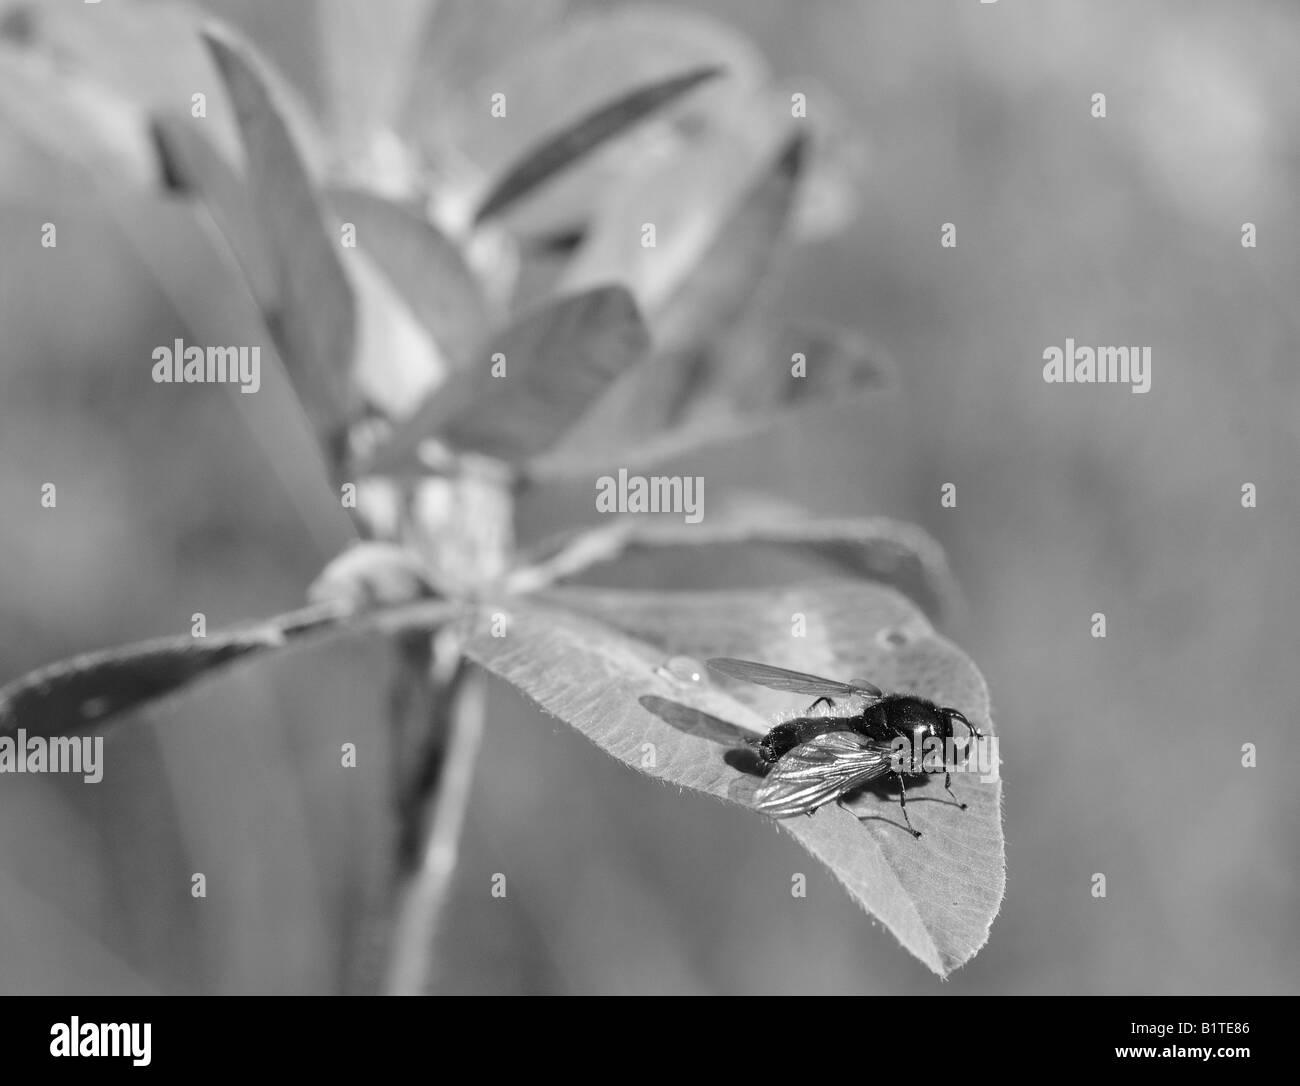 Black and white image of a fly on the leaf of a weed, with a drop of water on the leaf. Stock Photo